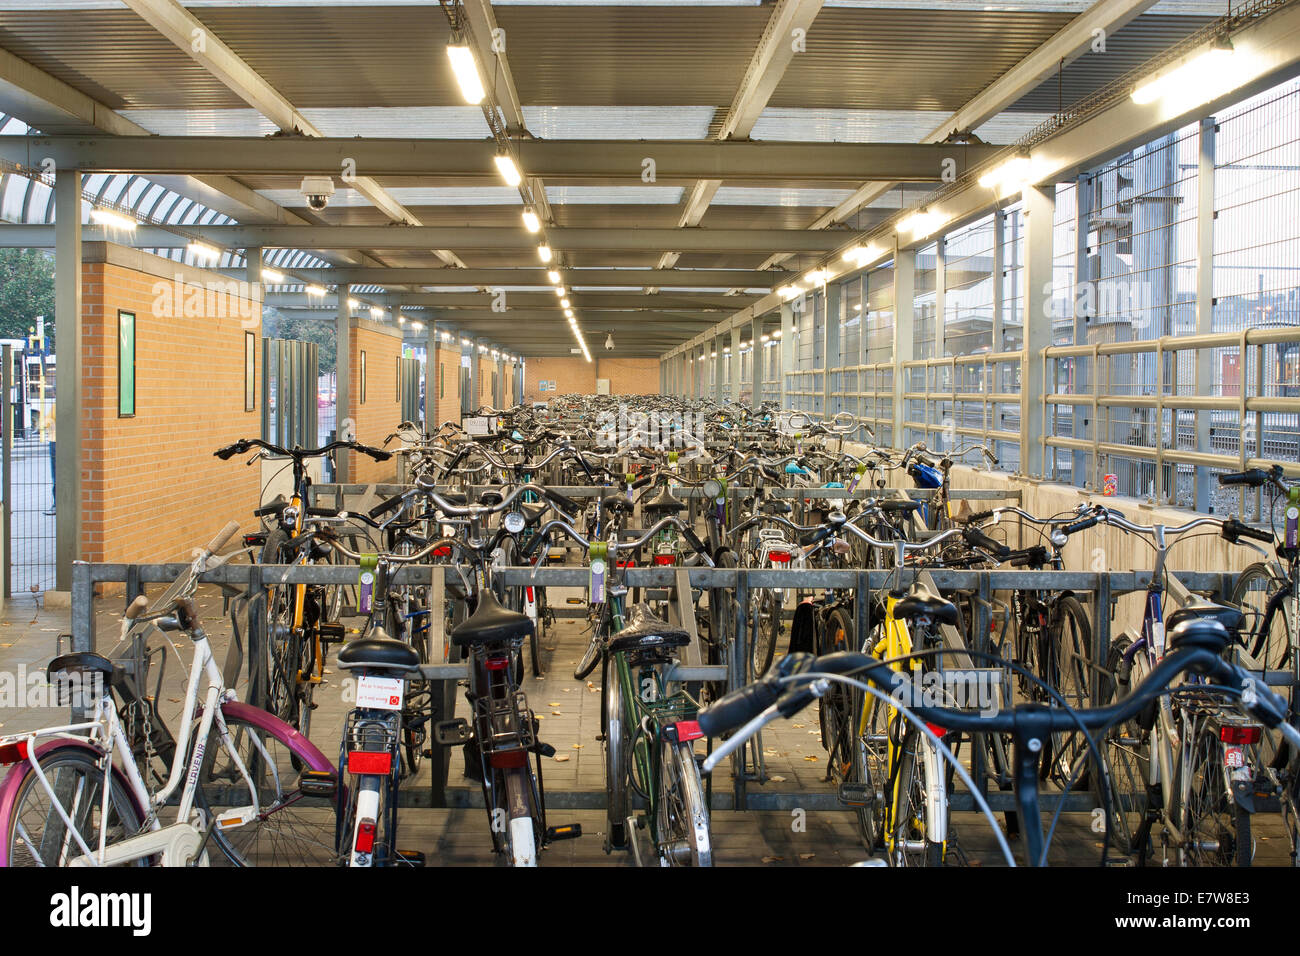 Abandoned bicycles lot parking Stock Photo